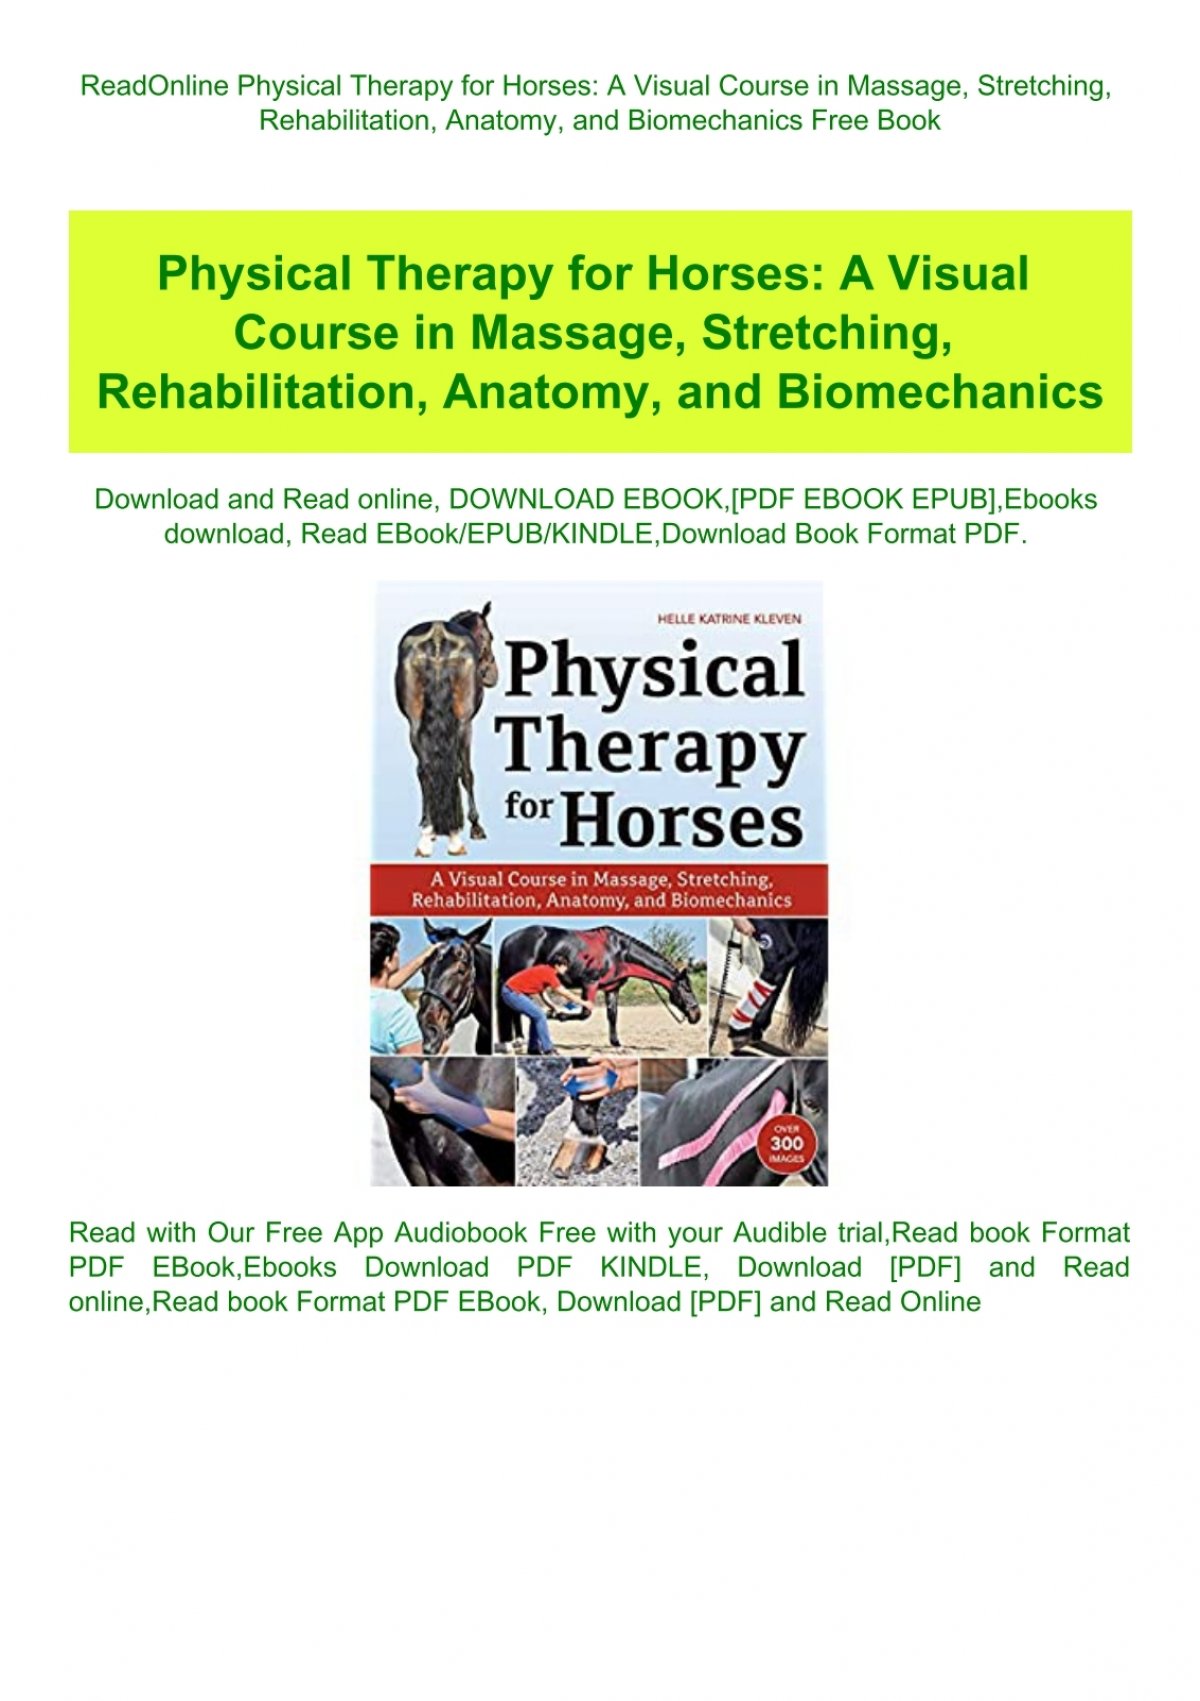 massage for horses book review